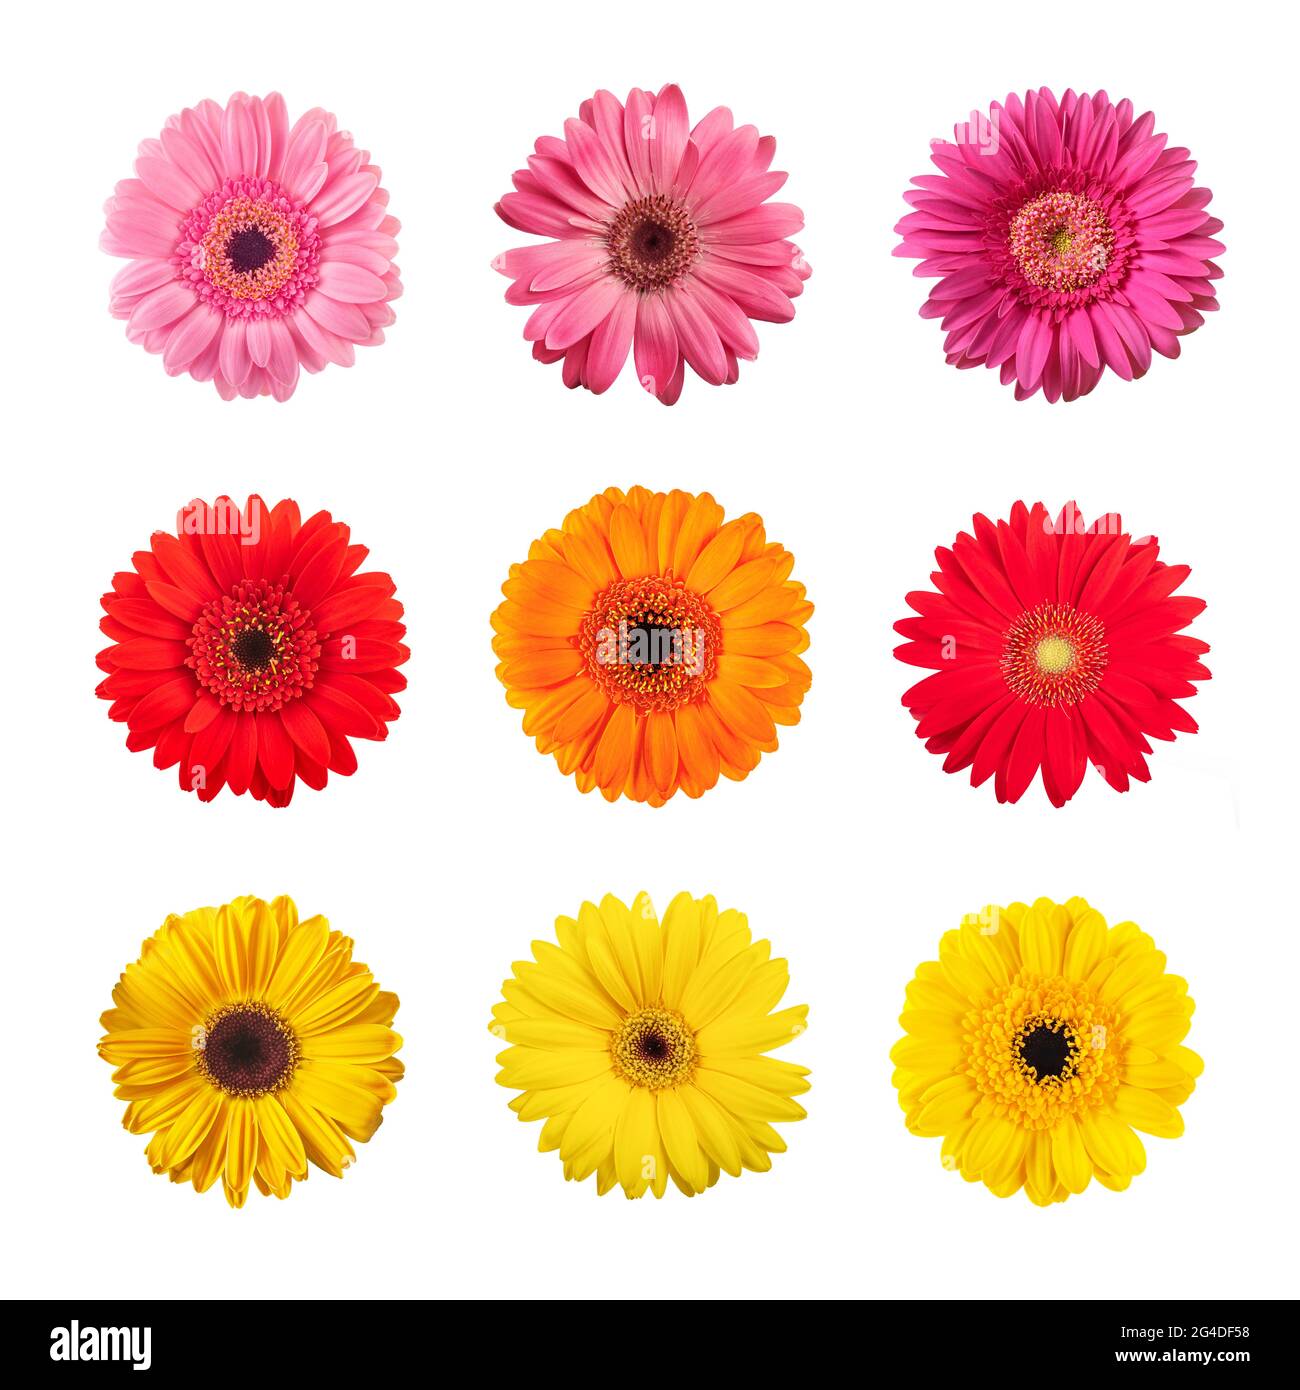 Gerberas flowers mix isolated on white background Stock Photo